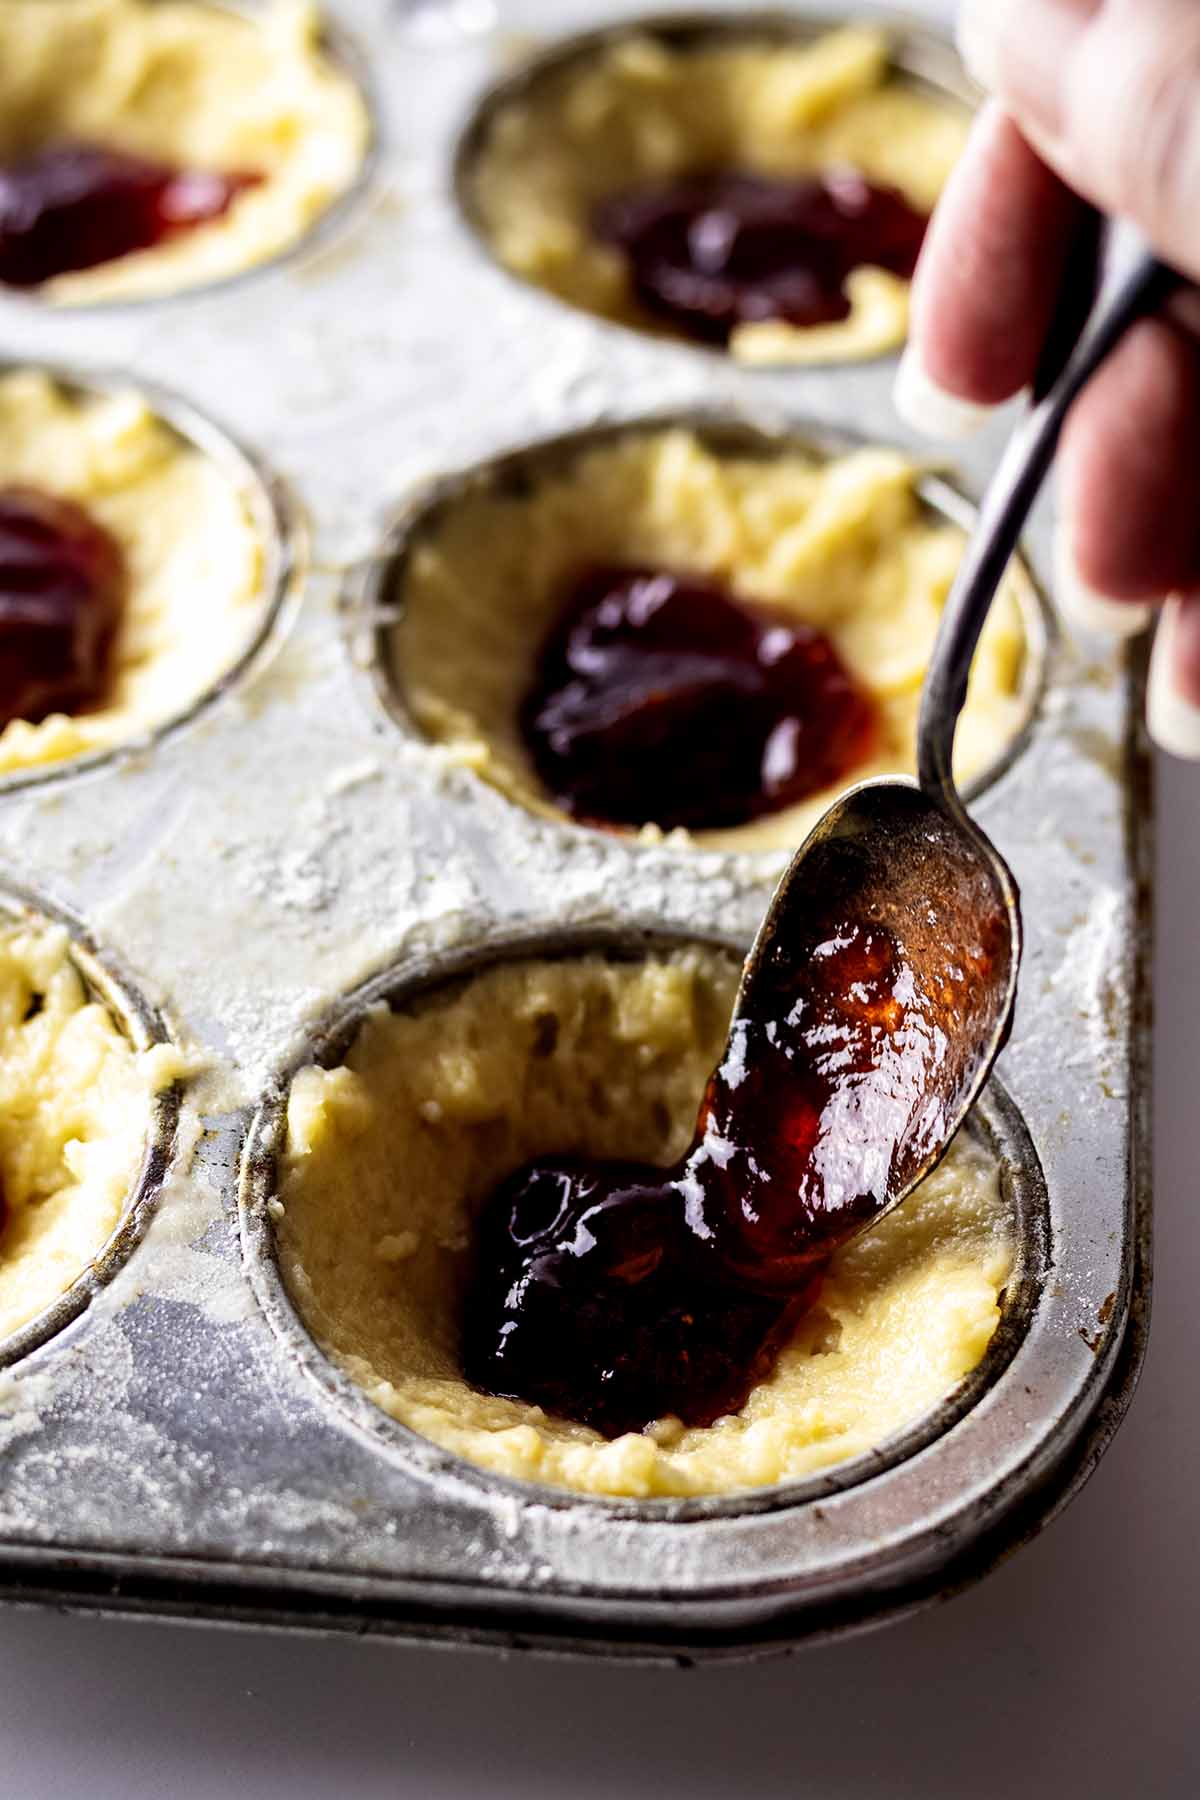 Preserves being spooned over batter in a muffin tin